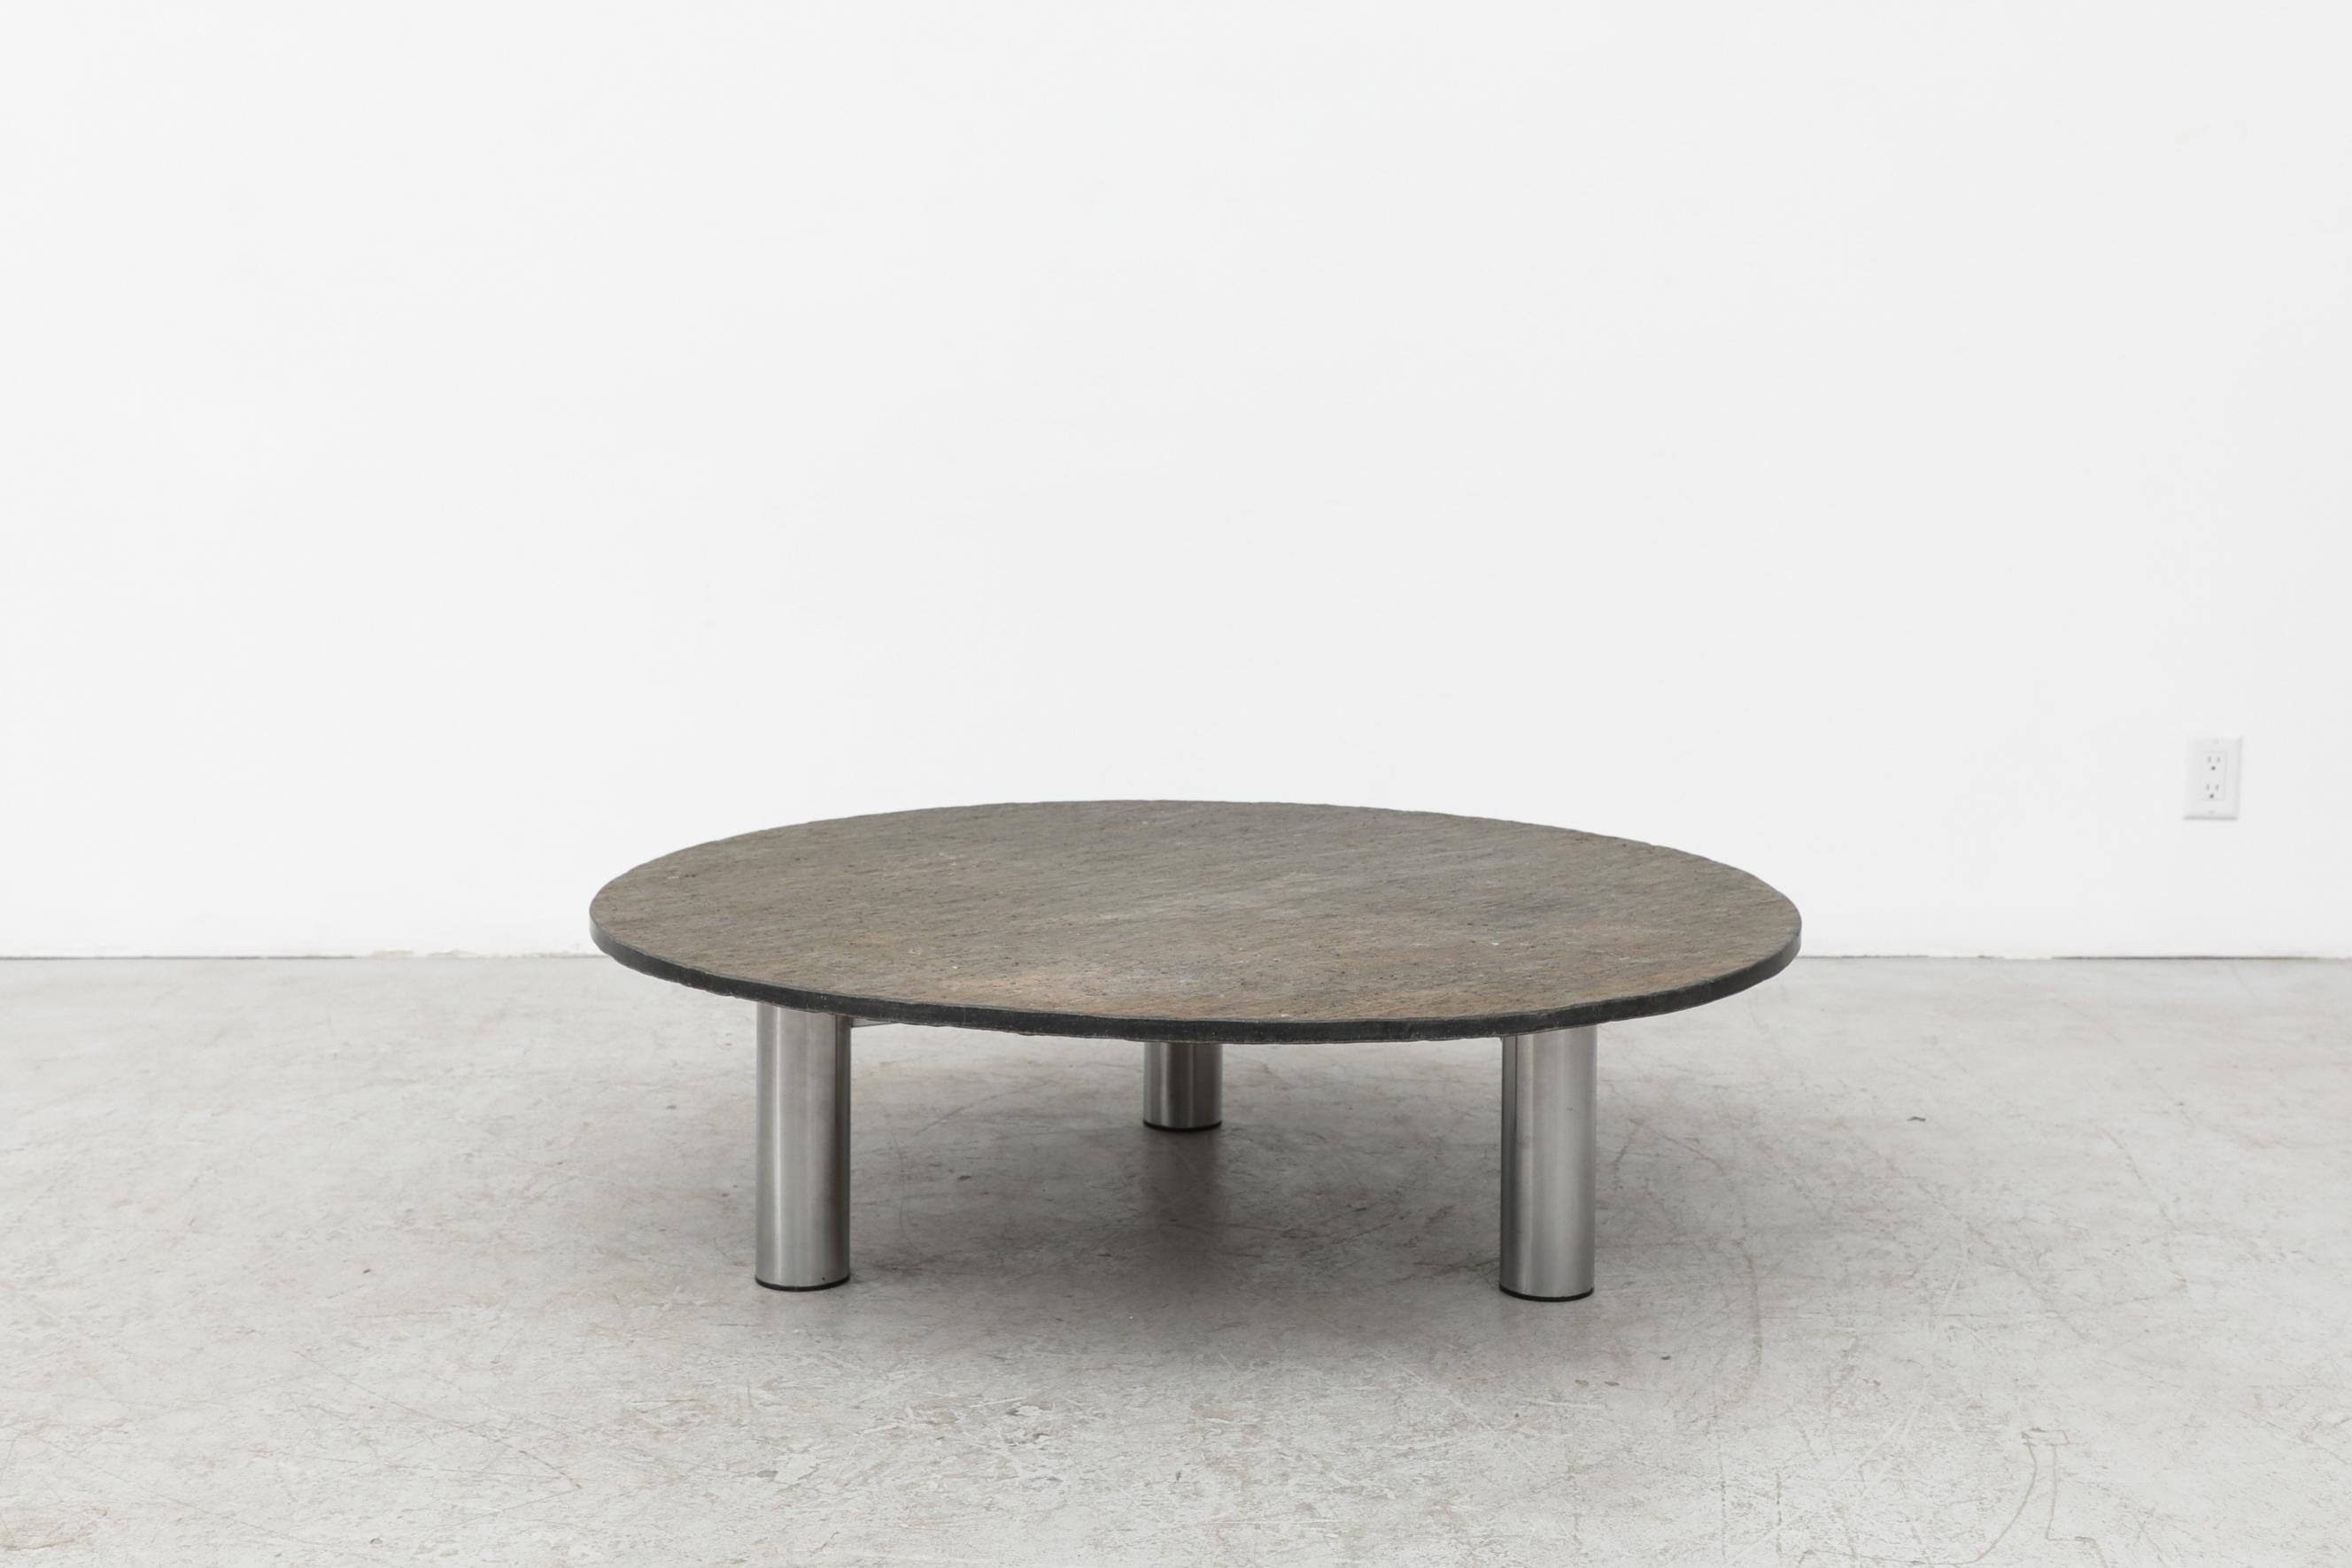 Stone coffee table with tubular steel base. There are bolts in the frame top which act as leveling tools. In original condition with visible patina and some wear to the frame, consistent with its age and use. Other similar stone tables available,